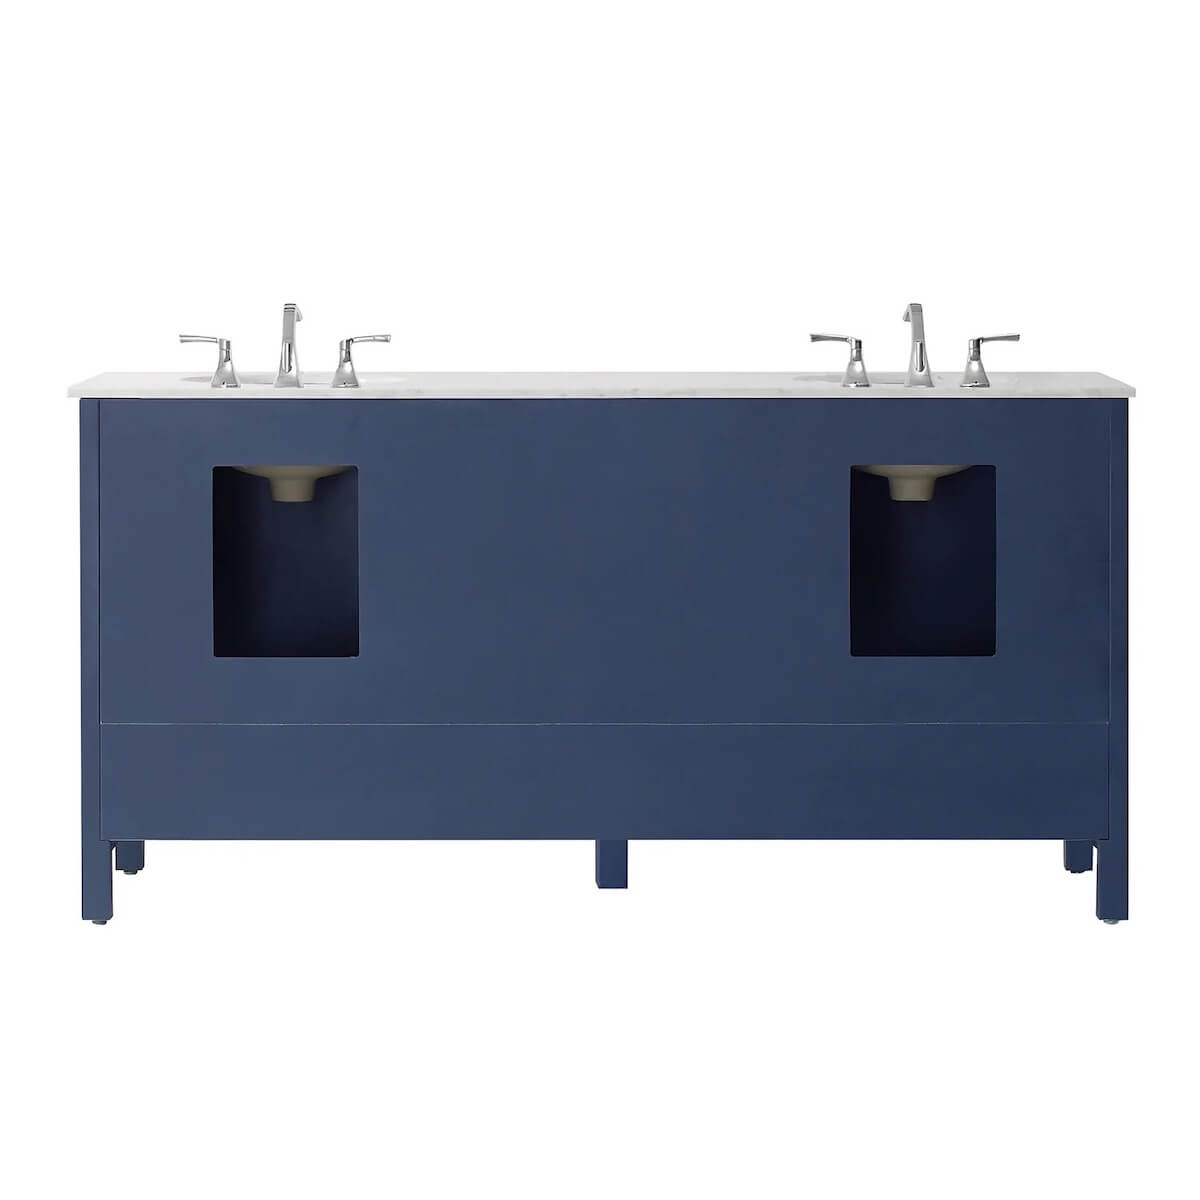 Vinnova 72” Gela Royal Blue Freestanding Double Vanity with Carrara White Marble Countertop Without Mirror Back 723072-RB-CA-NM